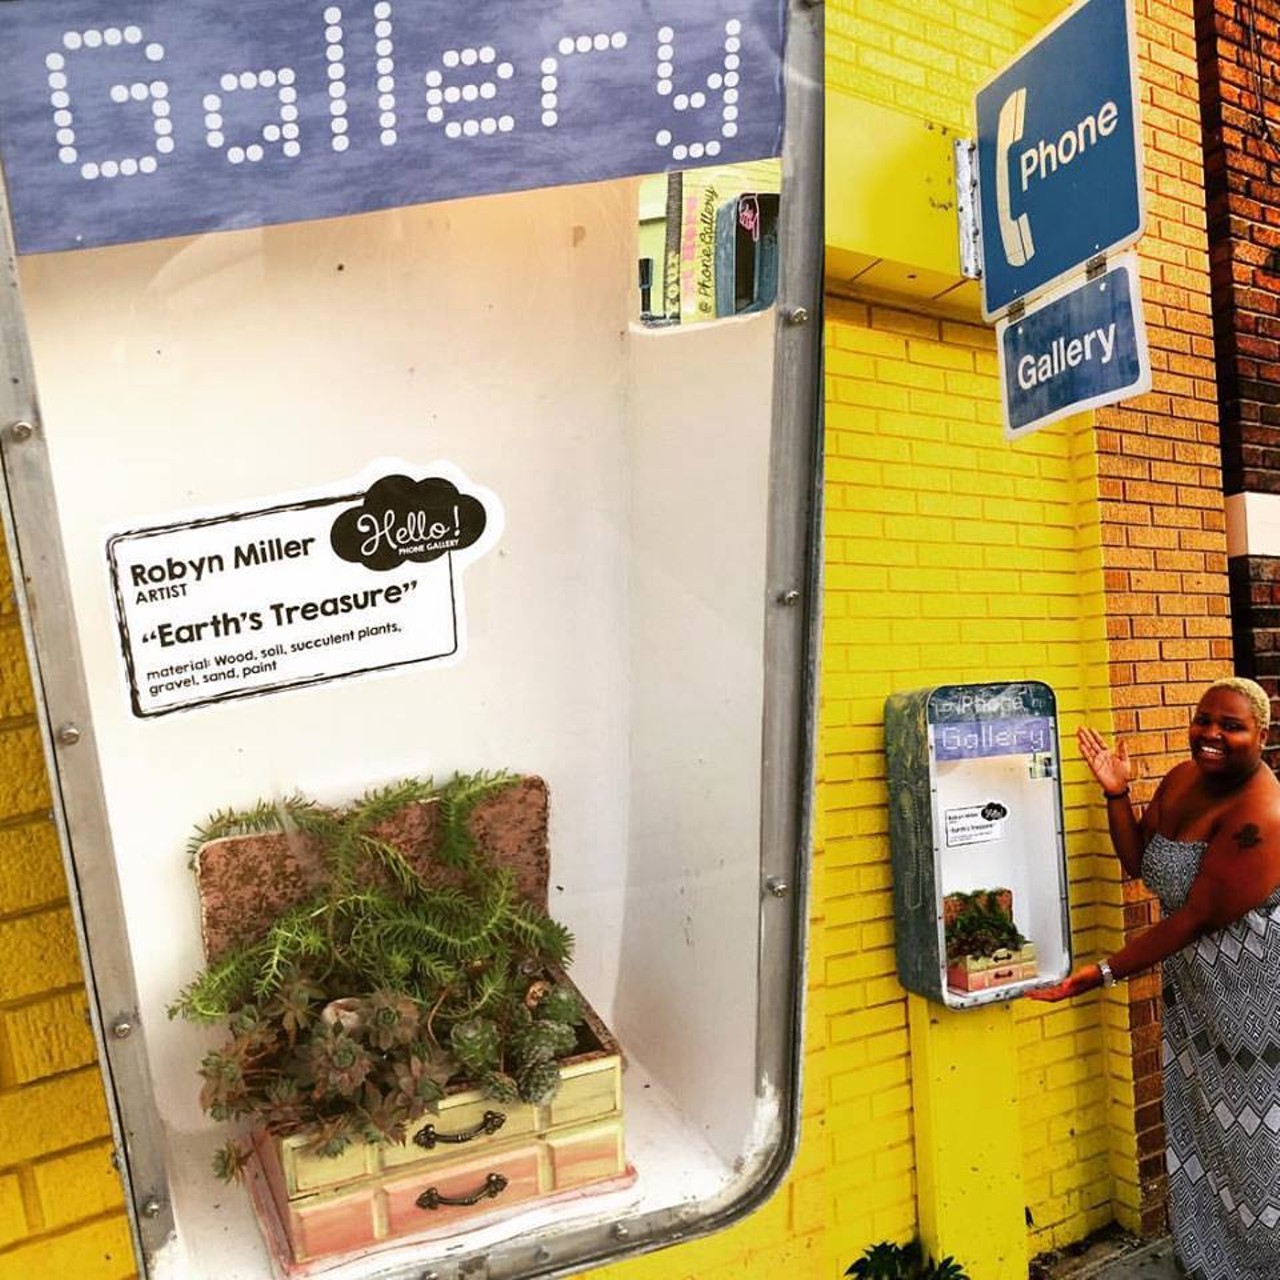 PHOTOS: Cleveland's Smallest Art Gallery is Located Inside an Old Phone Booth